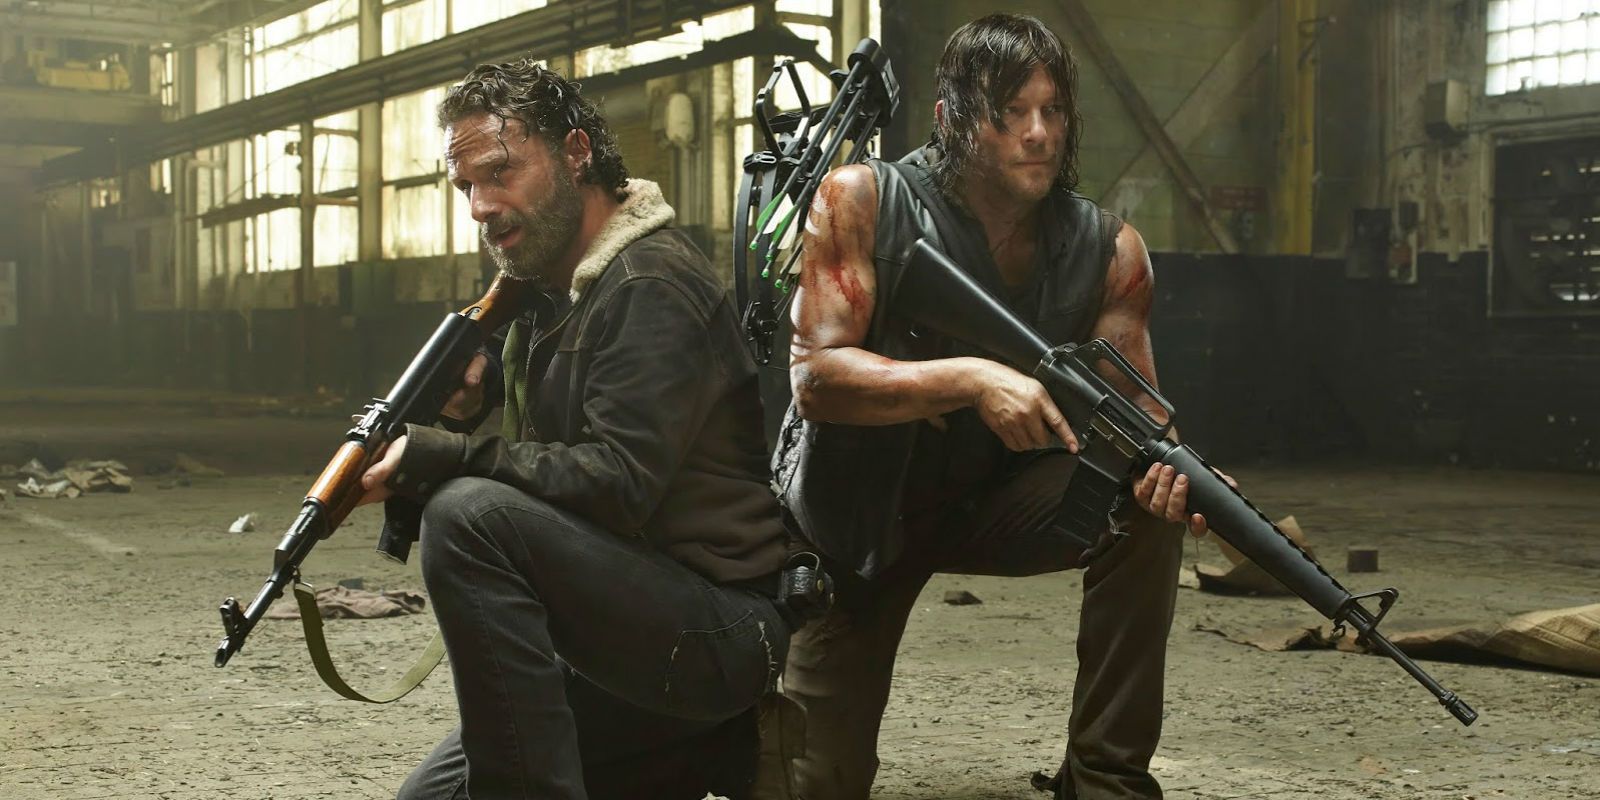 Rick (Andrew Lincoln) and Daryl (Norman Reedus) in The Walking Dead